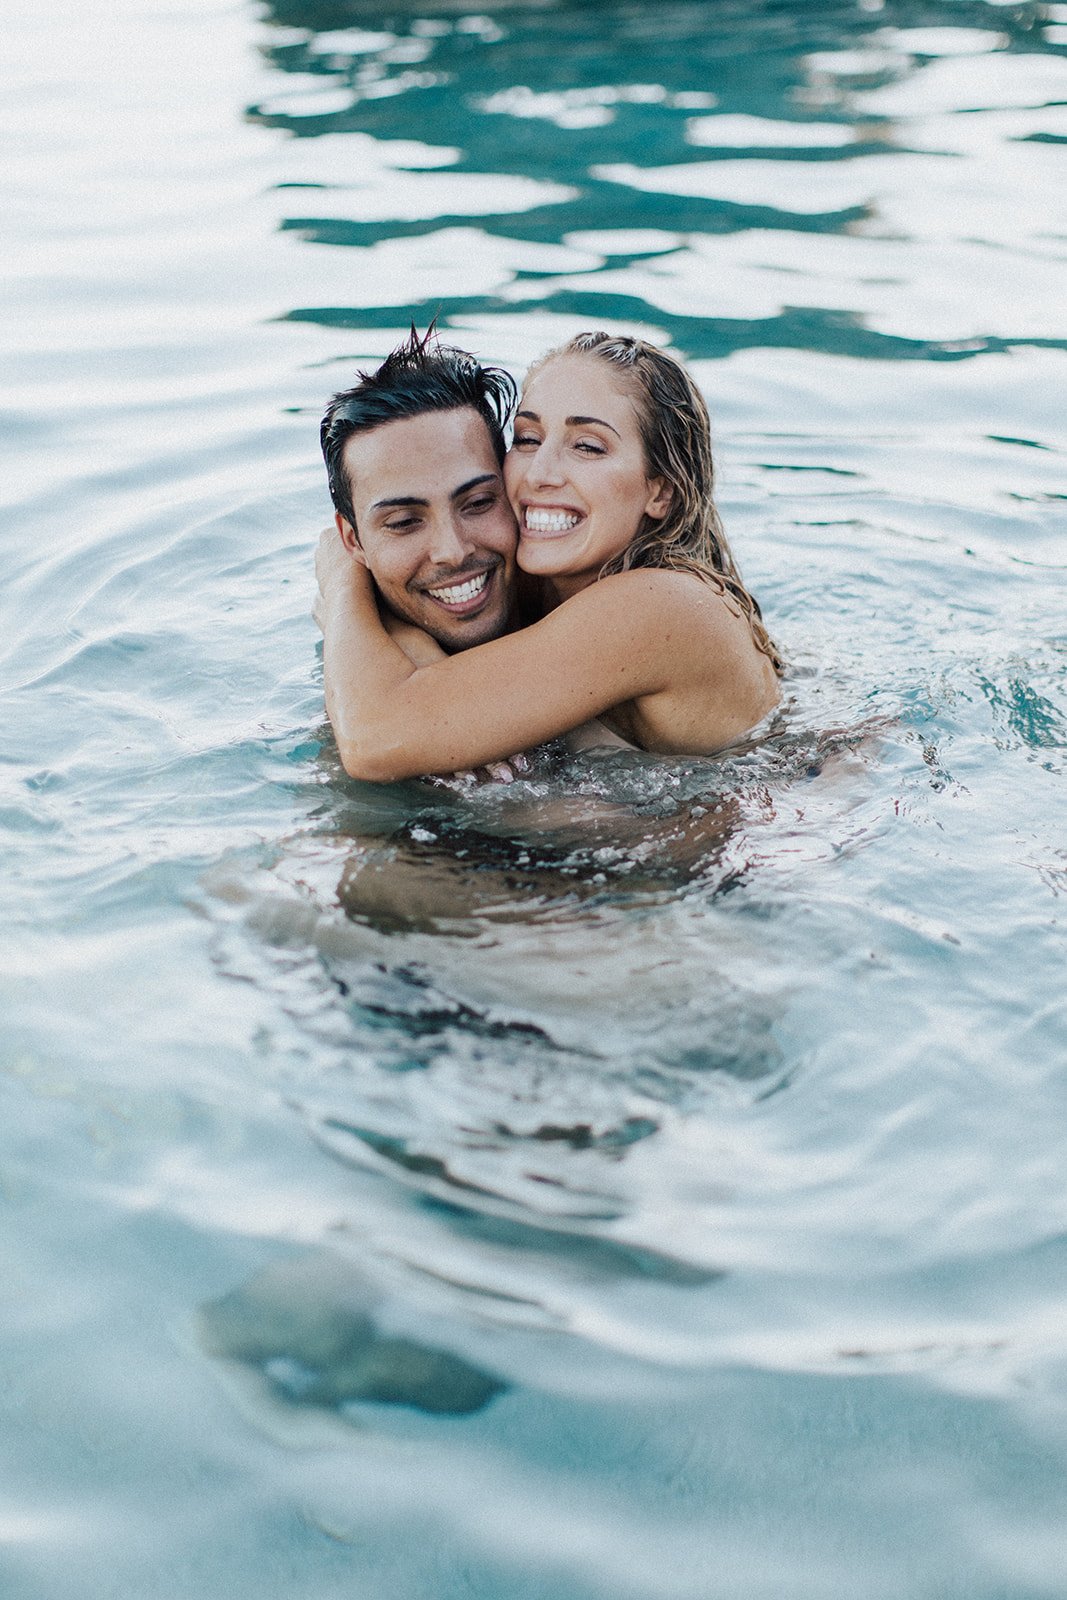 arjay paras recommends couple pool pics pic